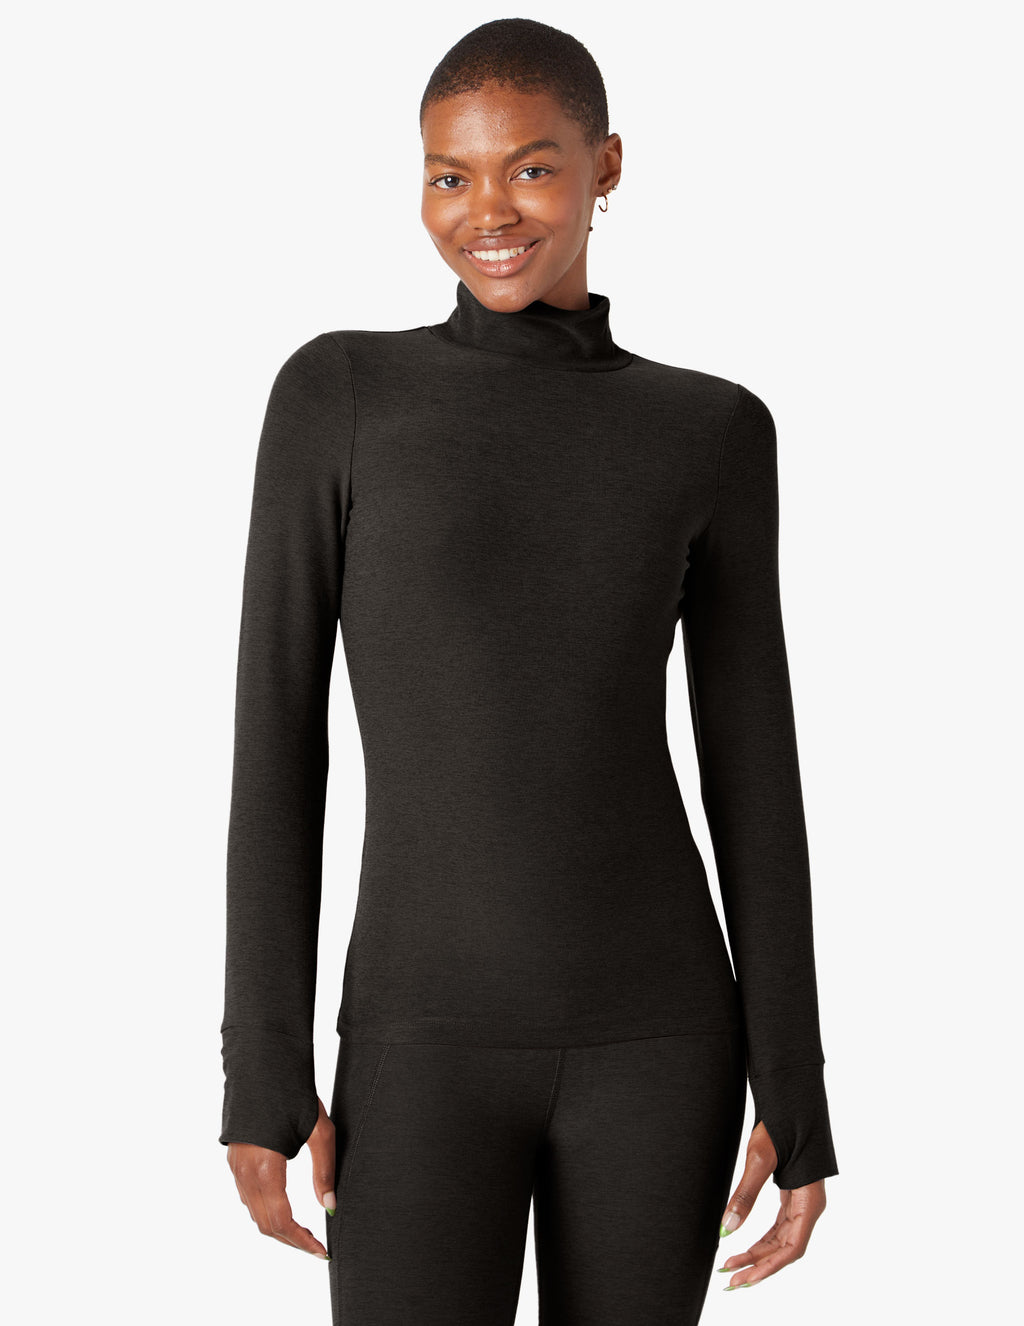 Spacedye Captivating Turtleneck Pullover Featured Image